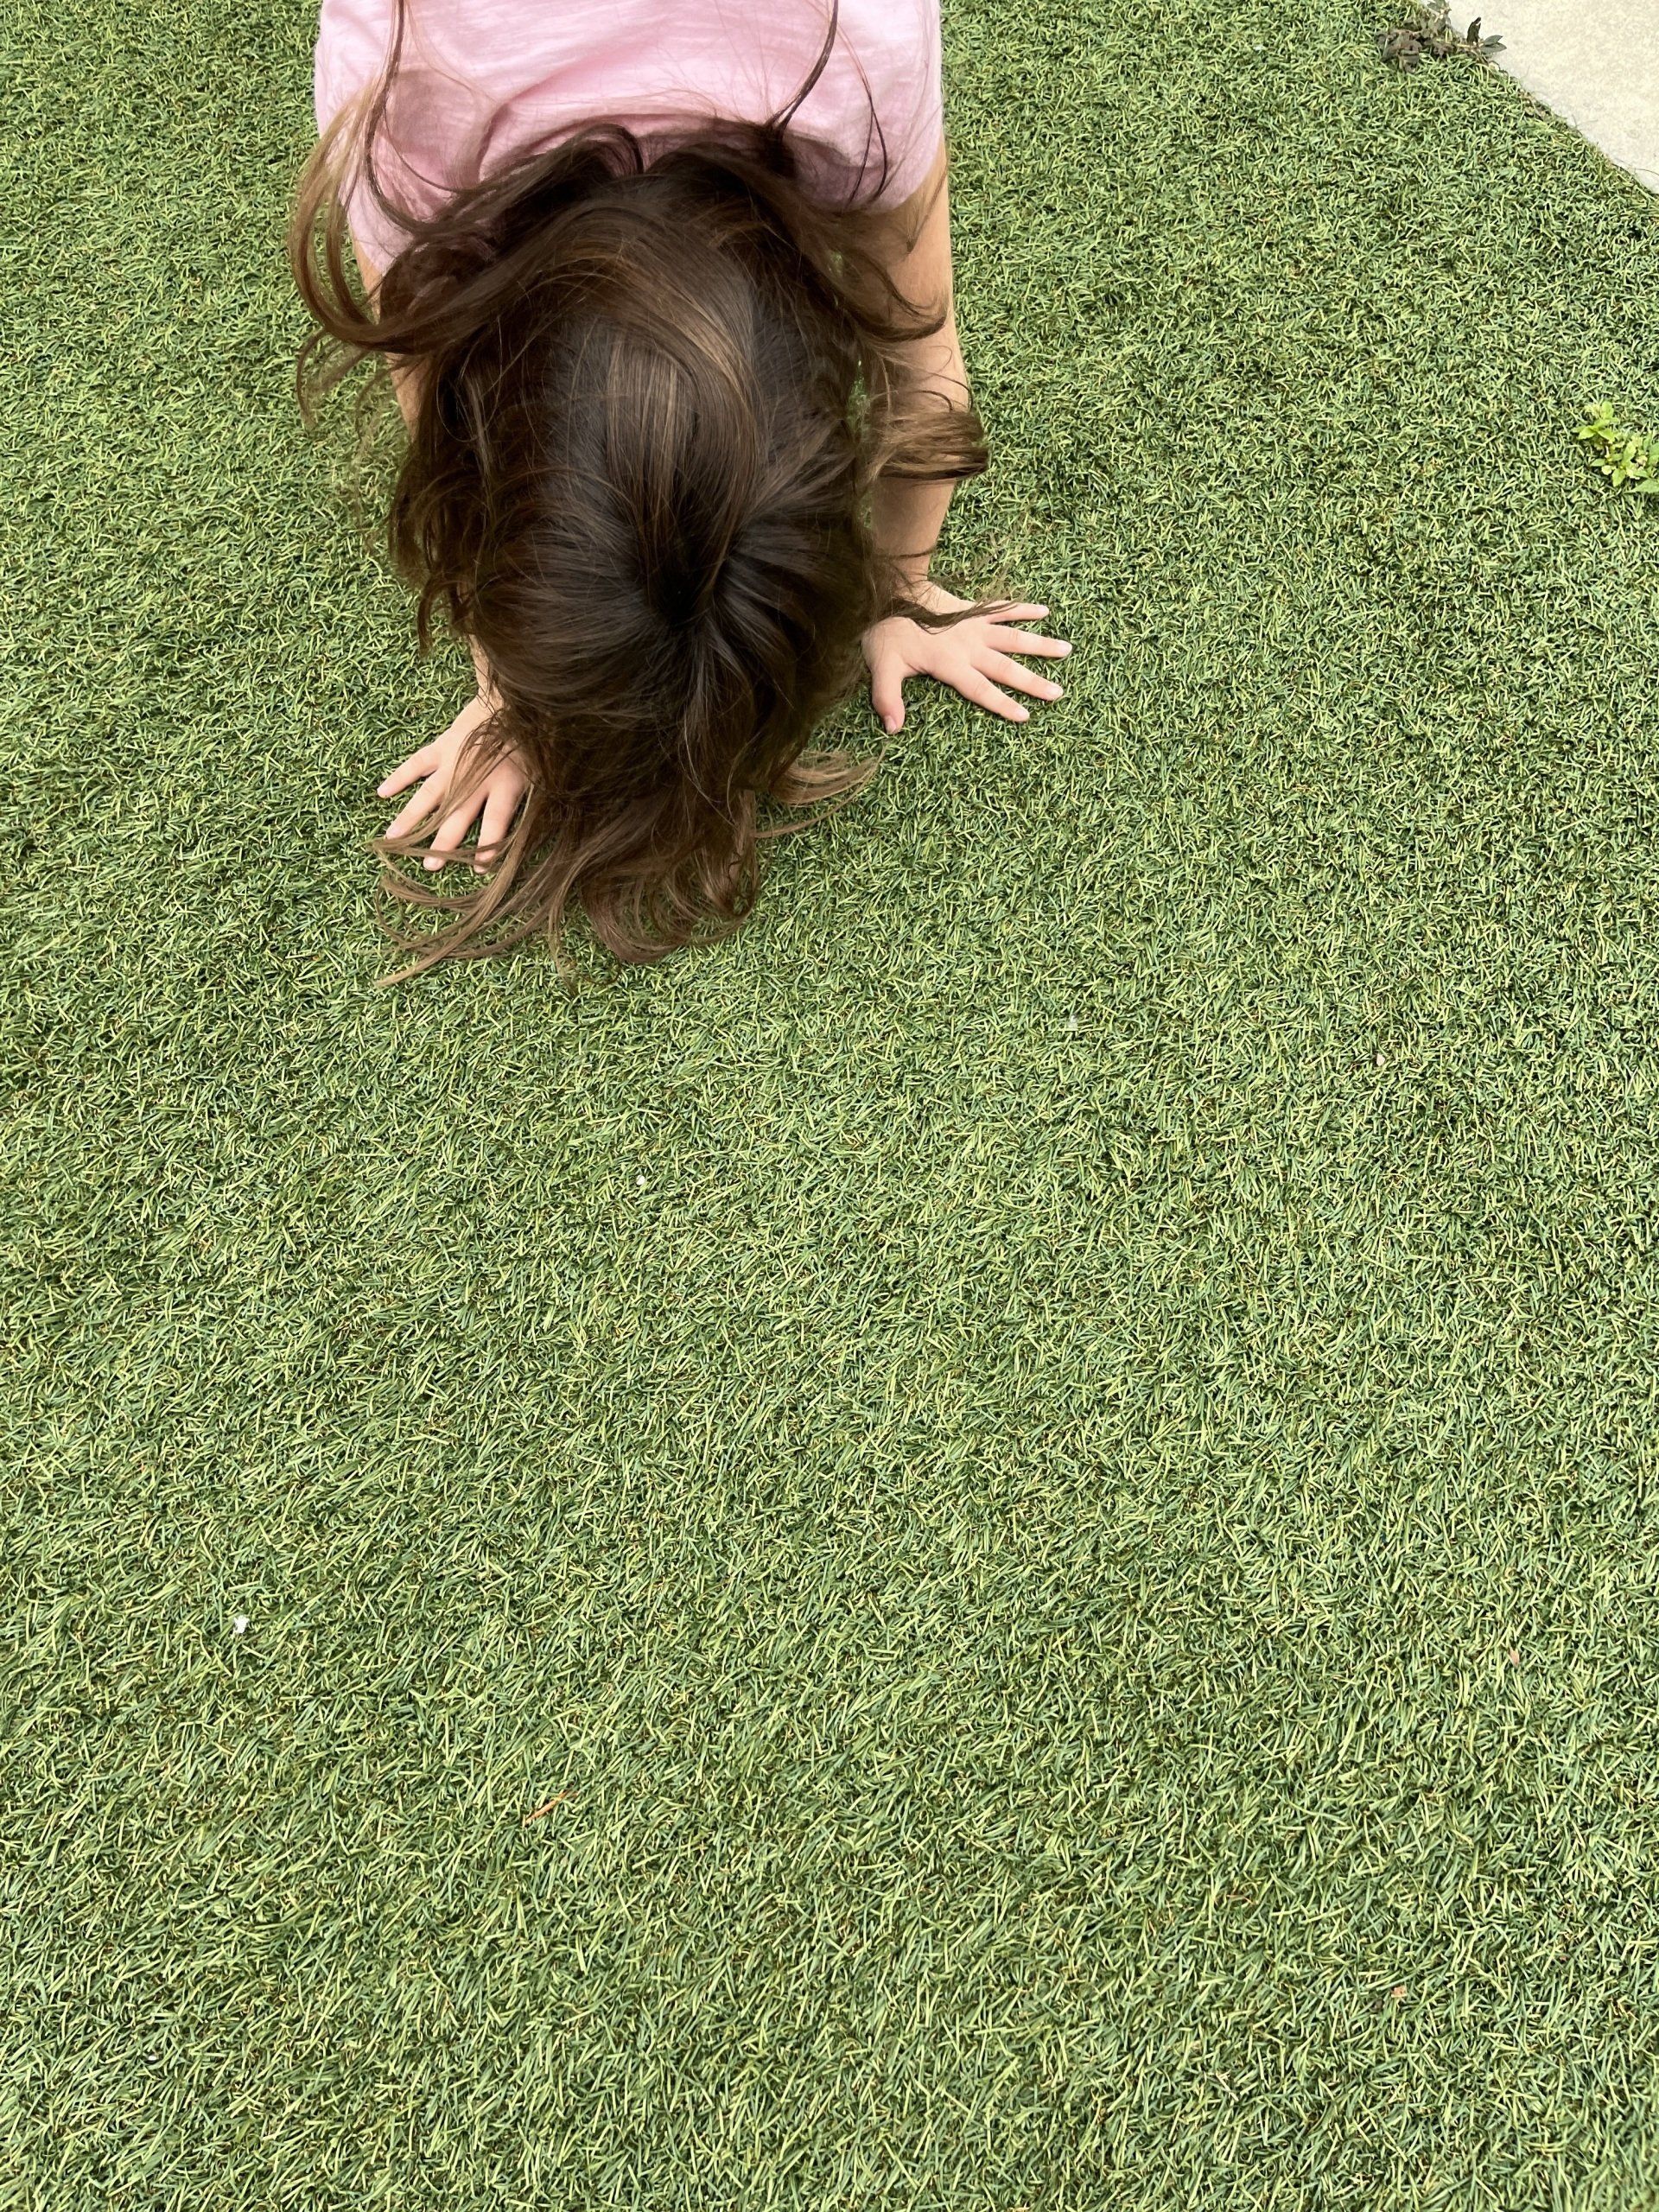 kid doing handstand on green fake grass